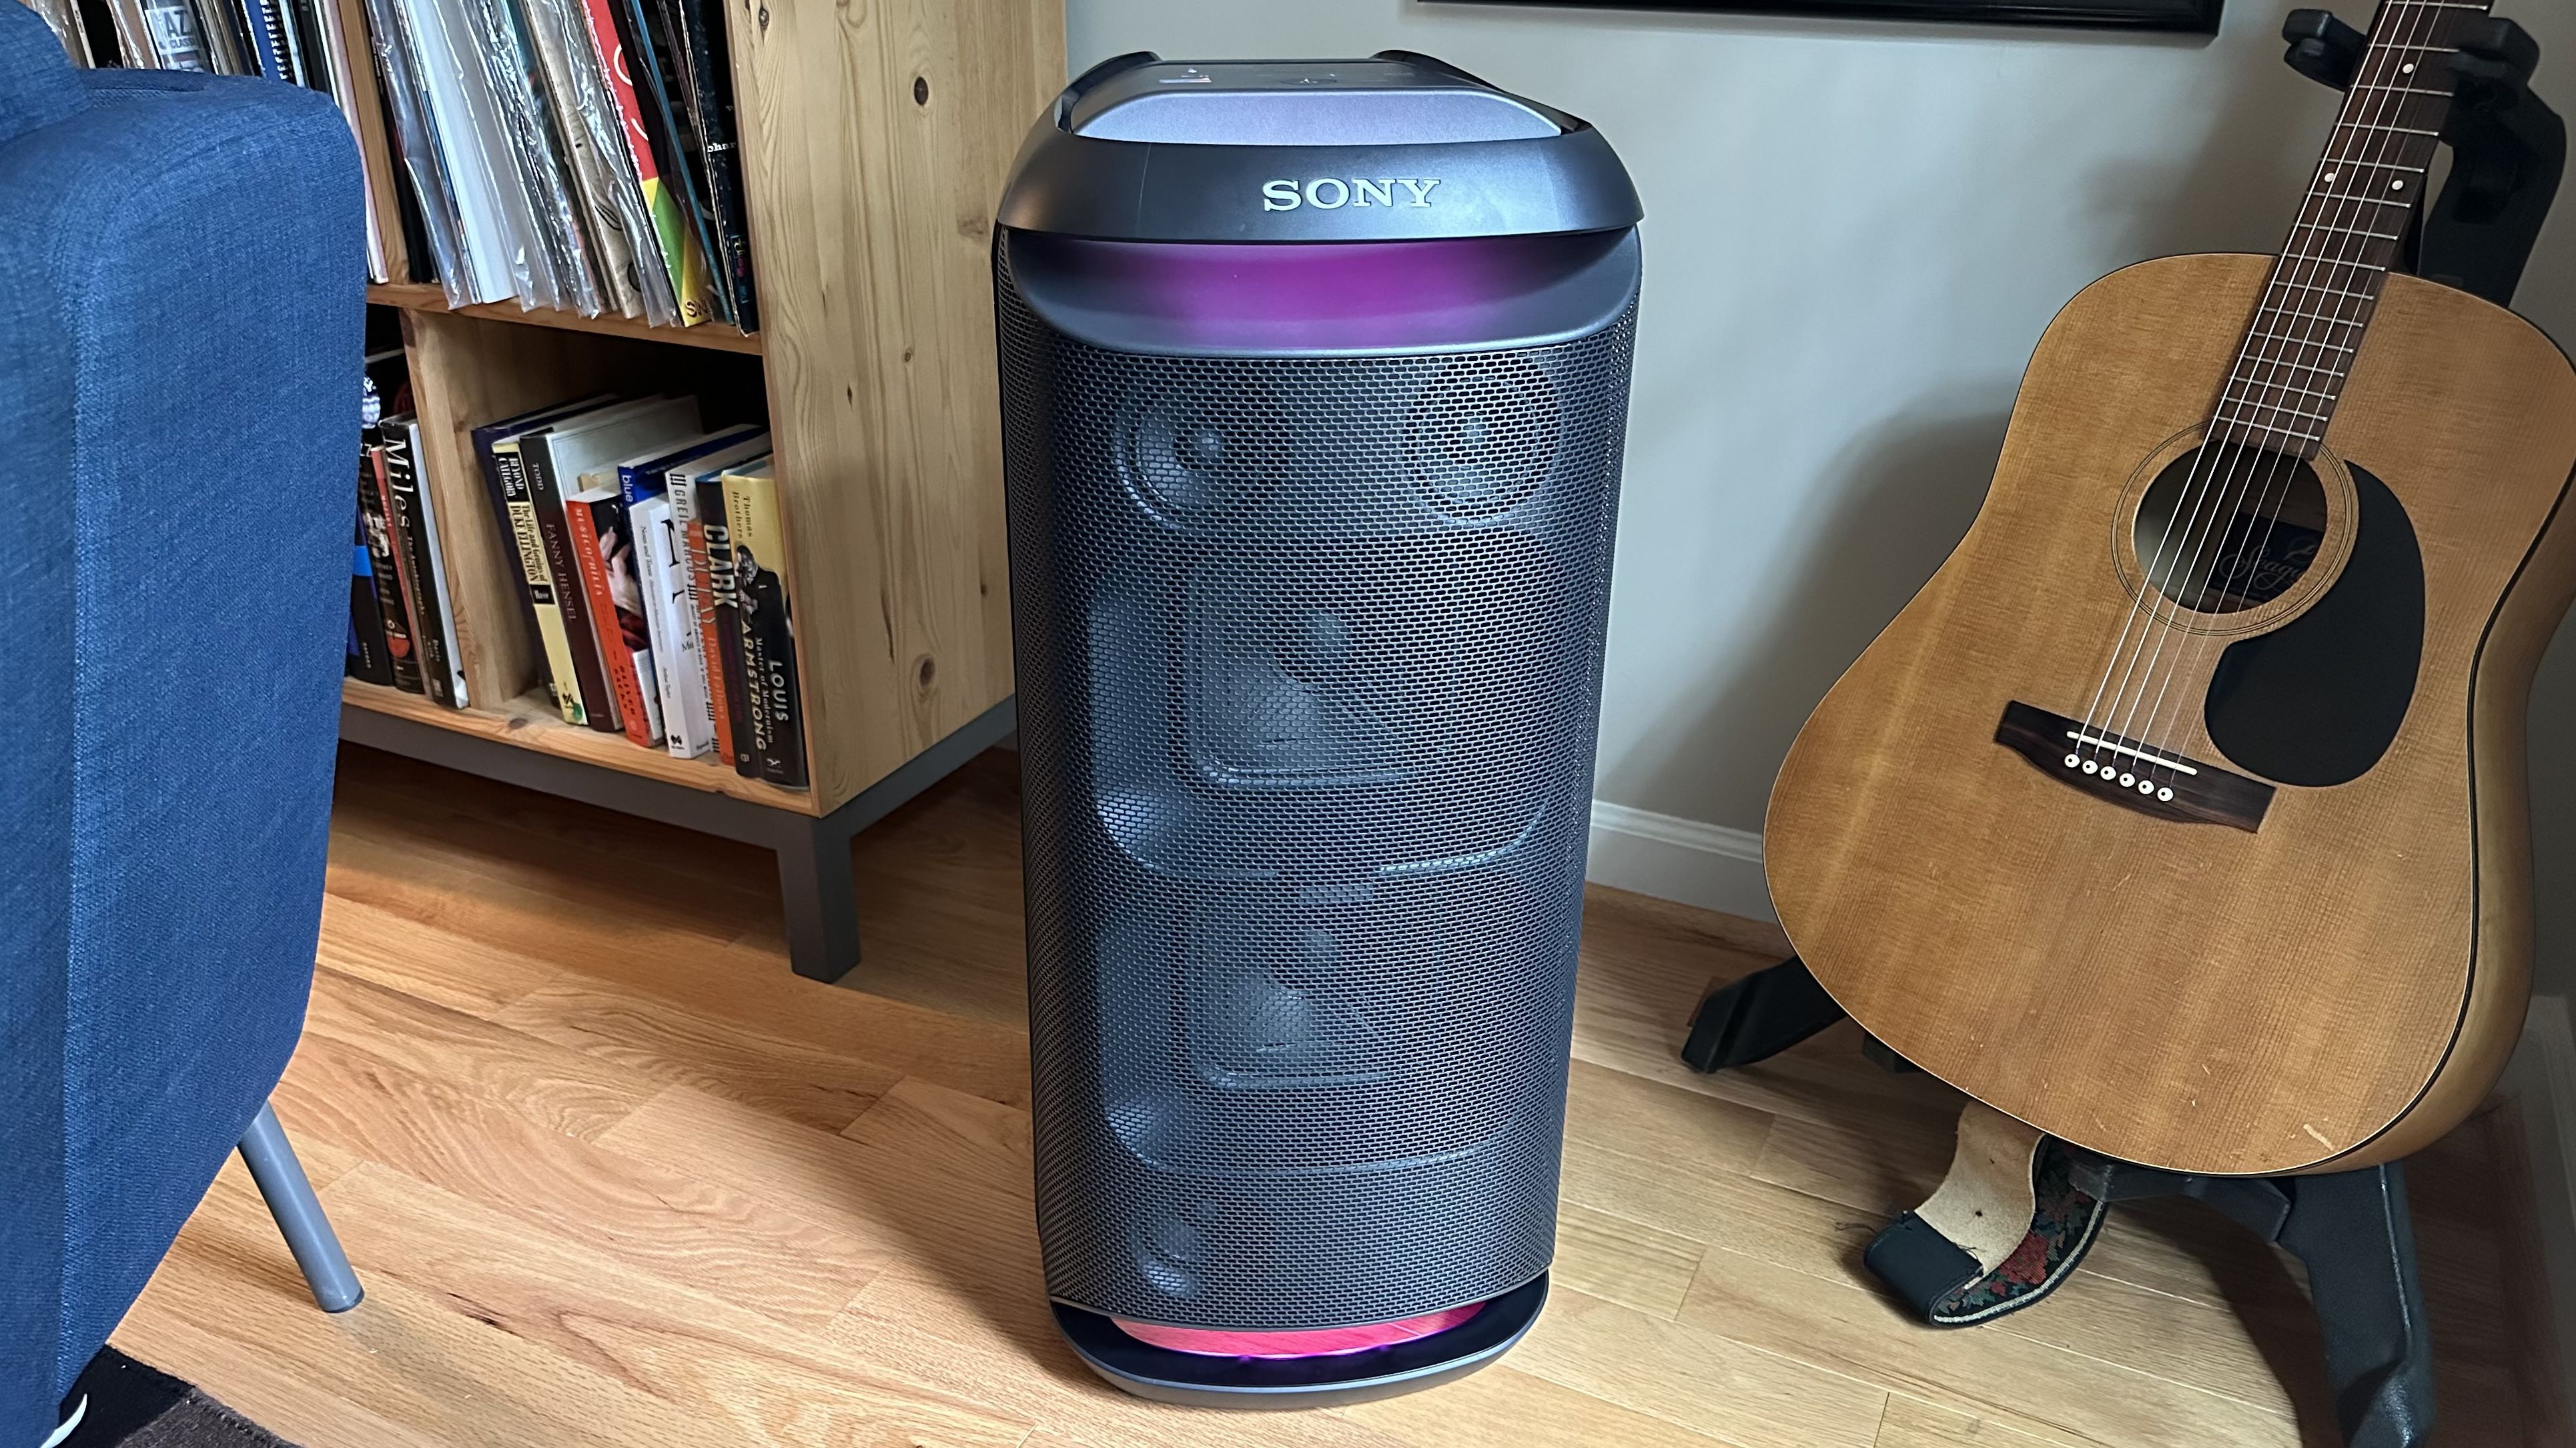 Sony SRS-XV800 review: This tower of power is ready to party